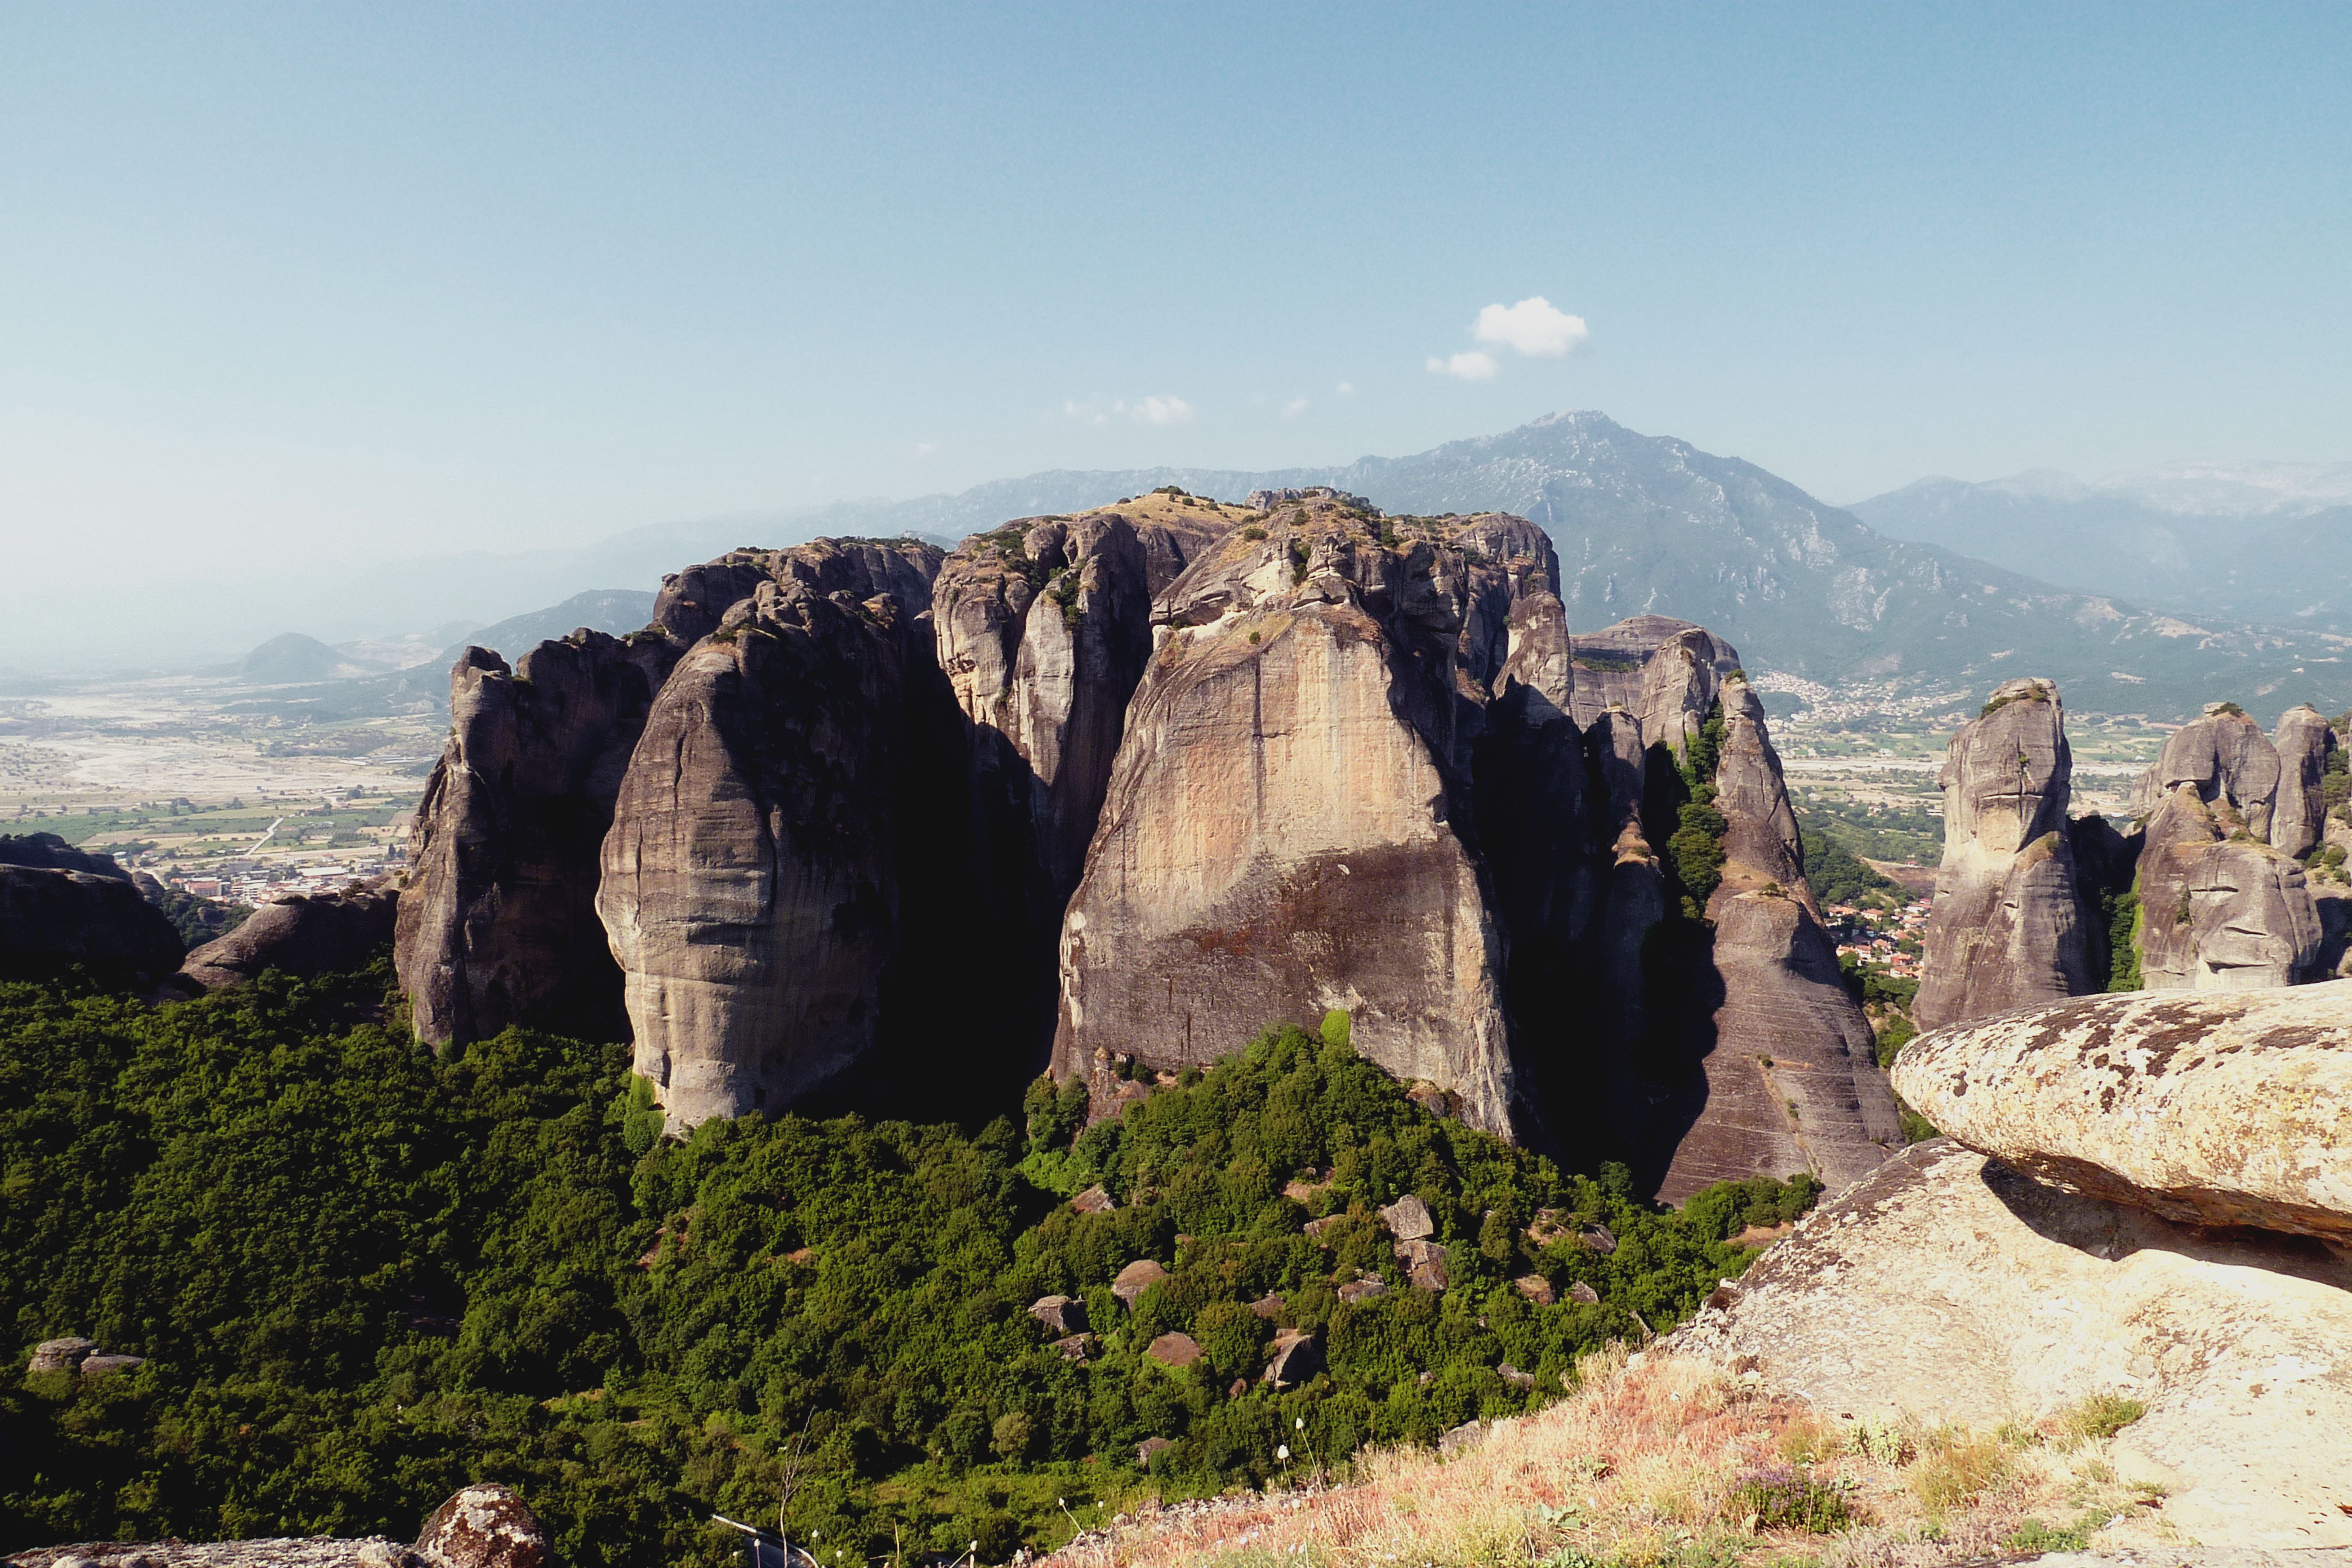 Day 5: Meteora Cliffs and Monasteries